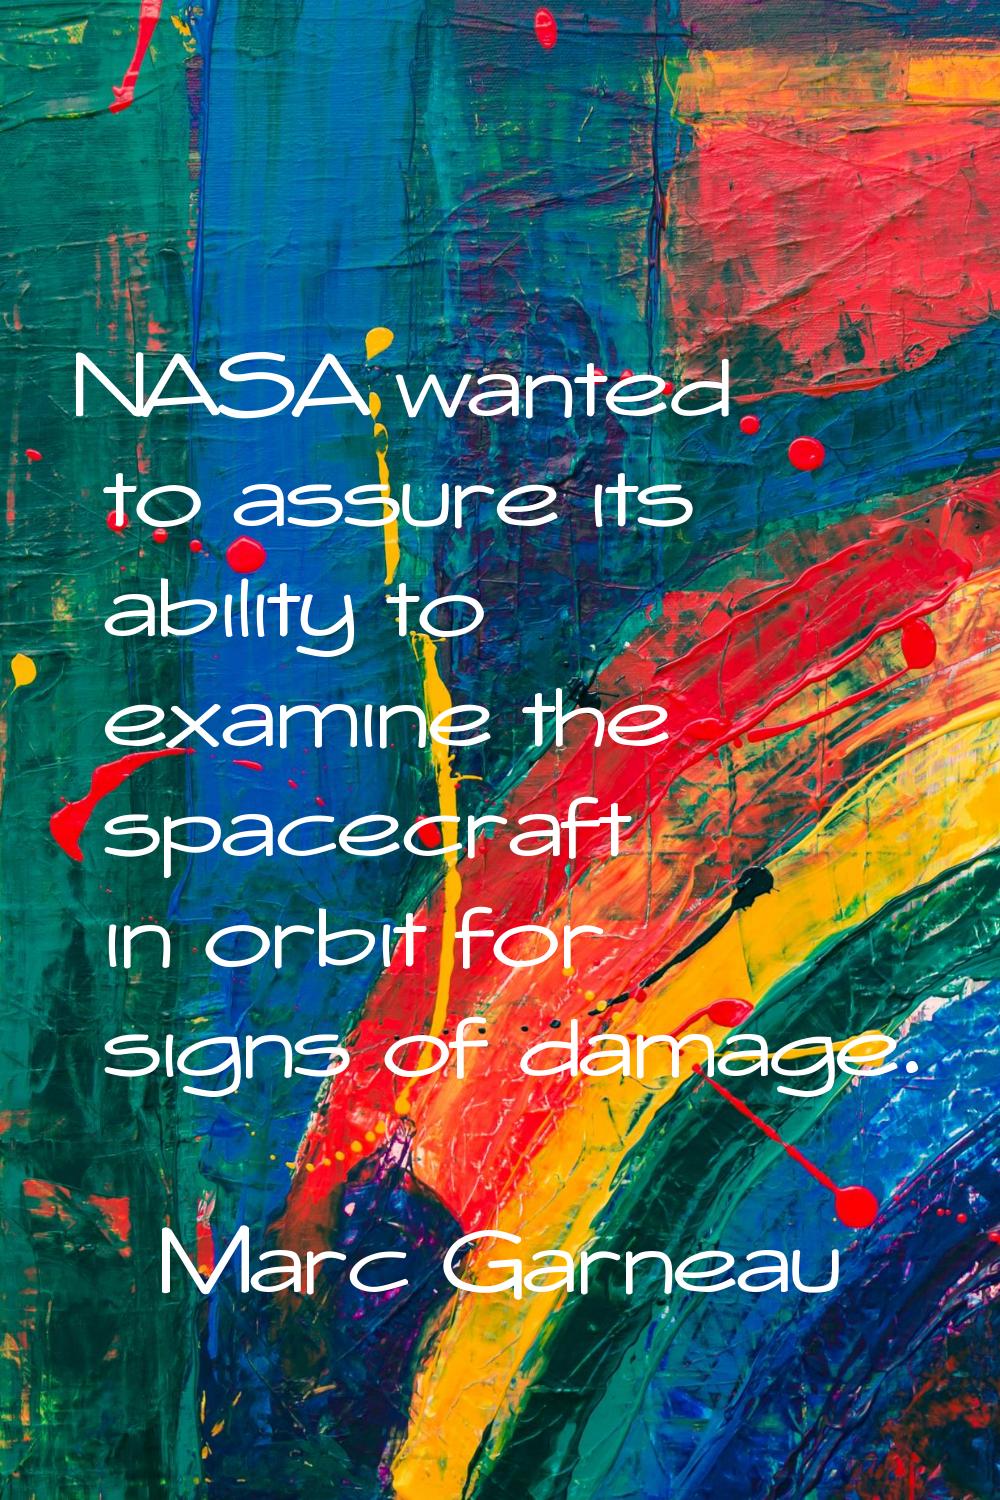 NASA wanted to assure its ability to examine the spacecraft in orbit for signs of damage.